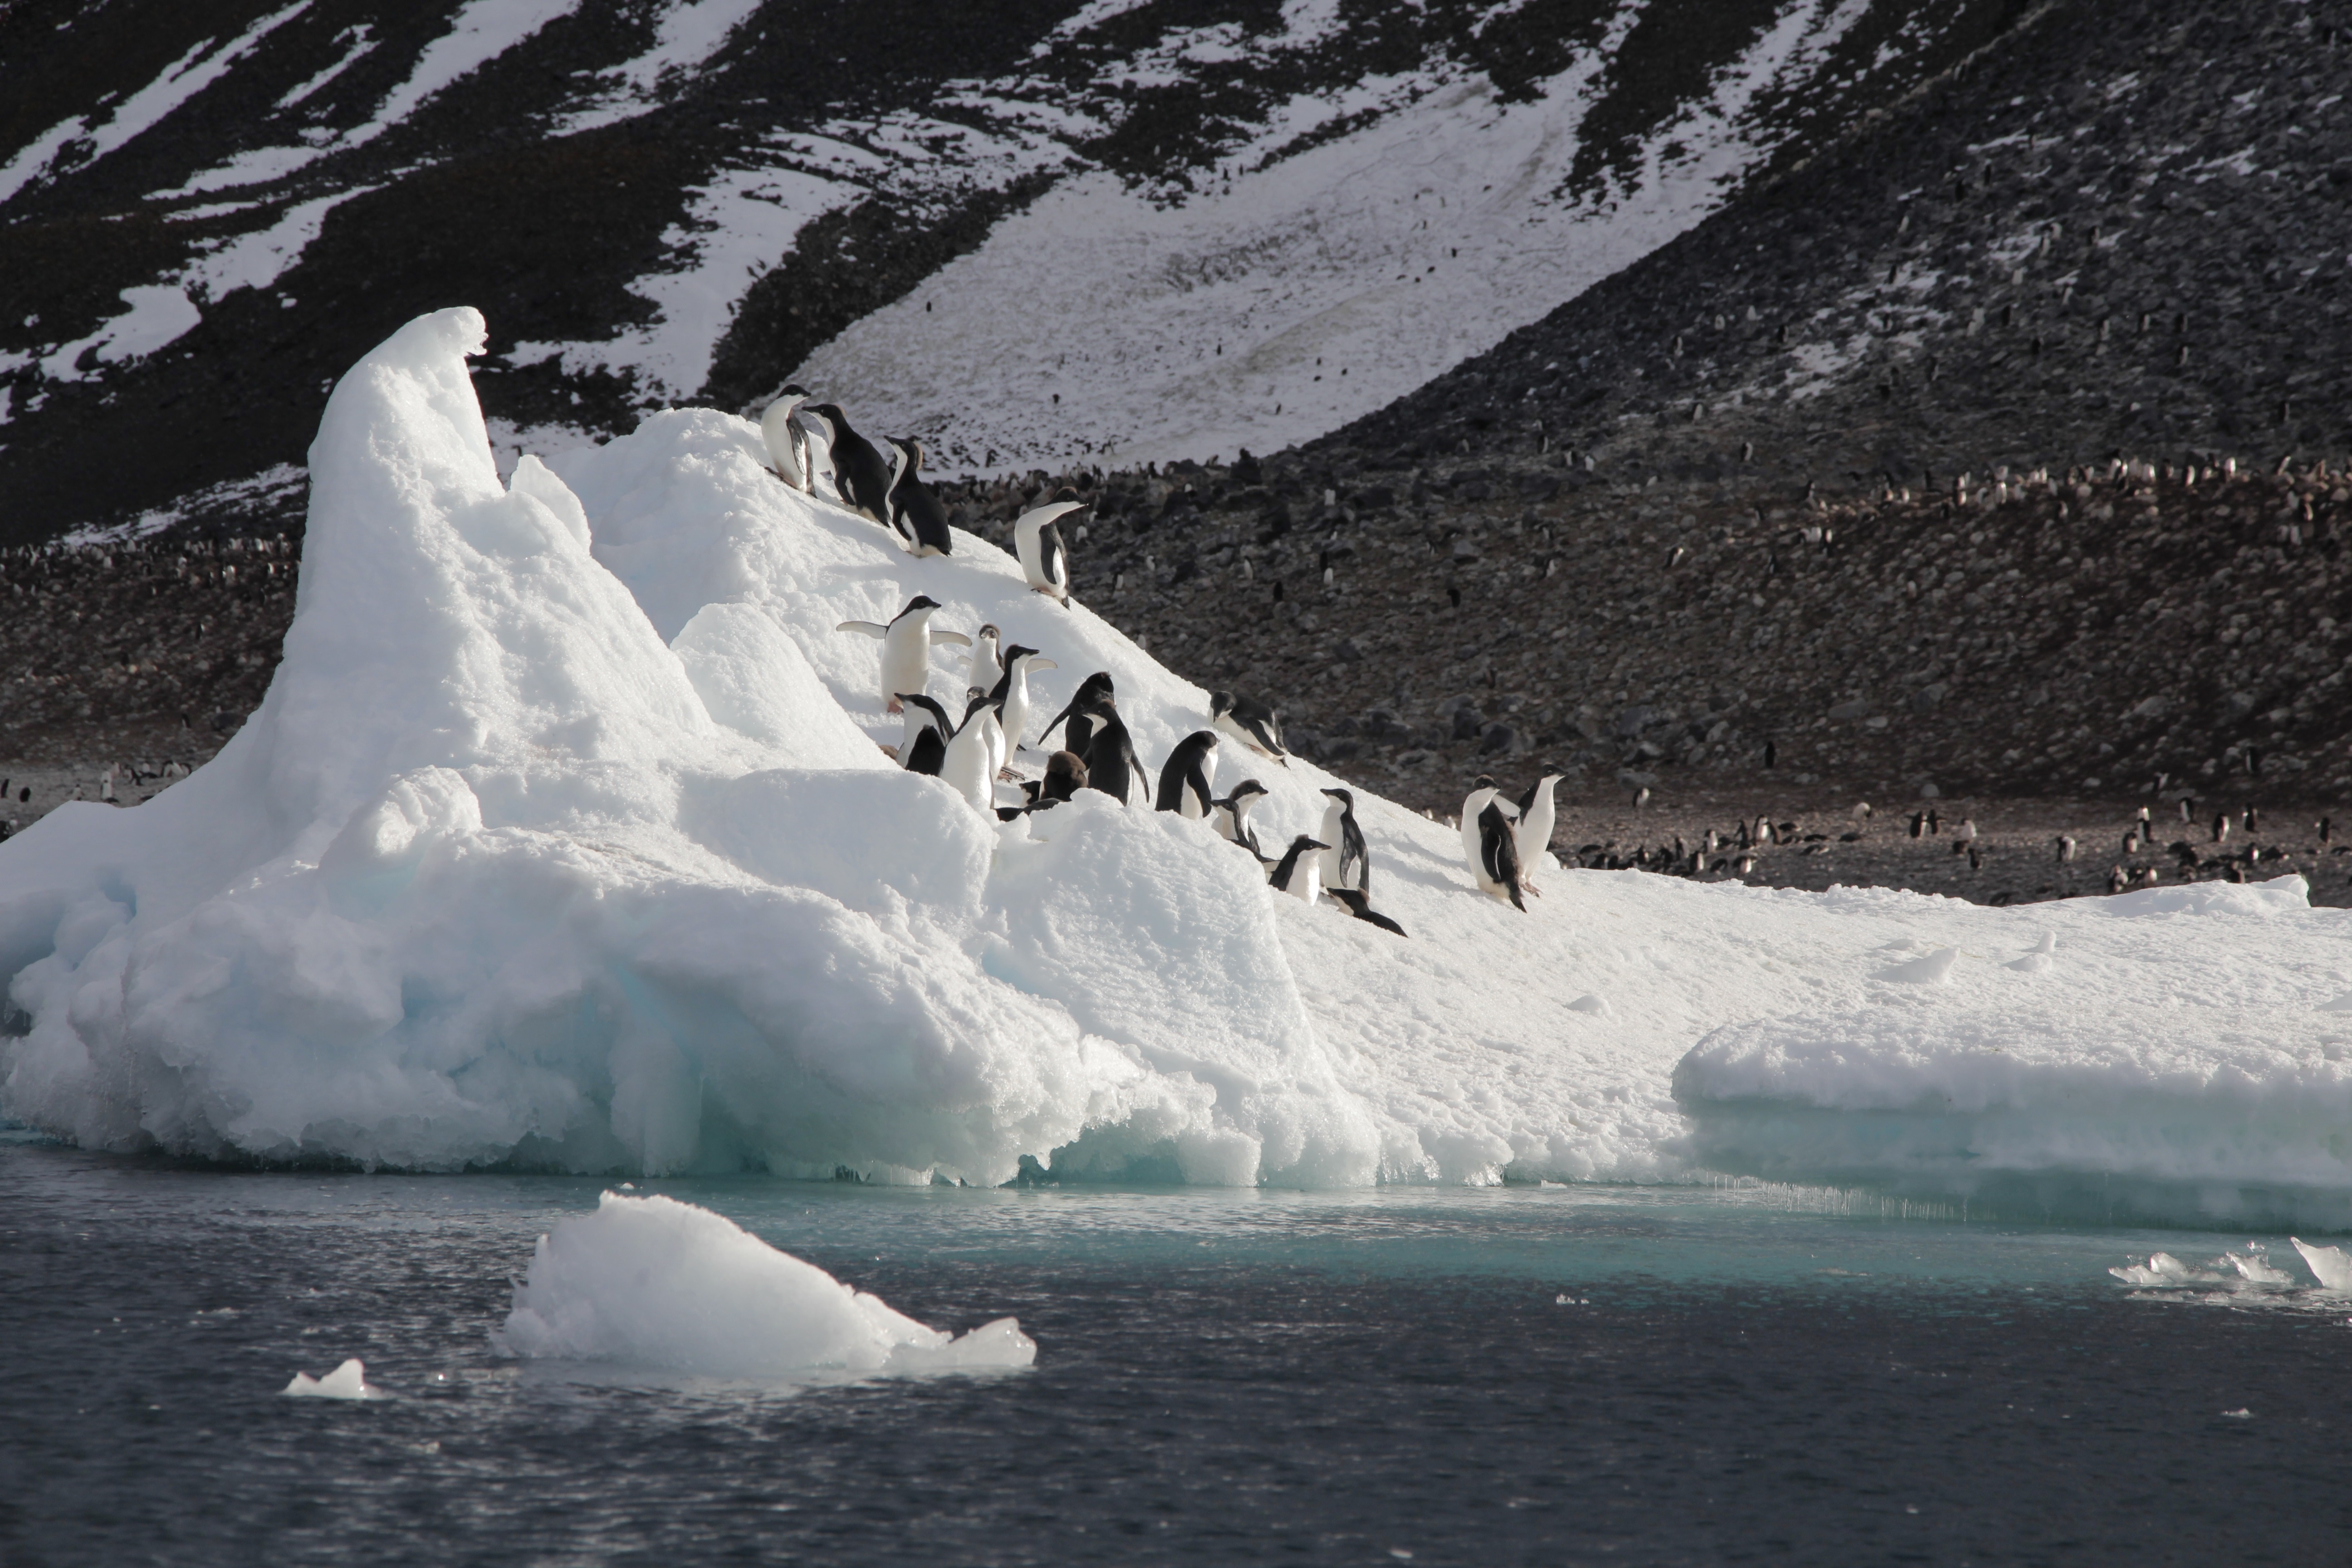 Adelie penguins on an iceflow